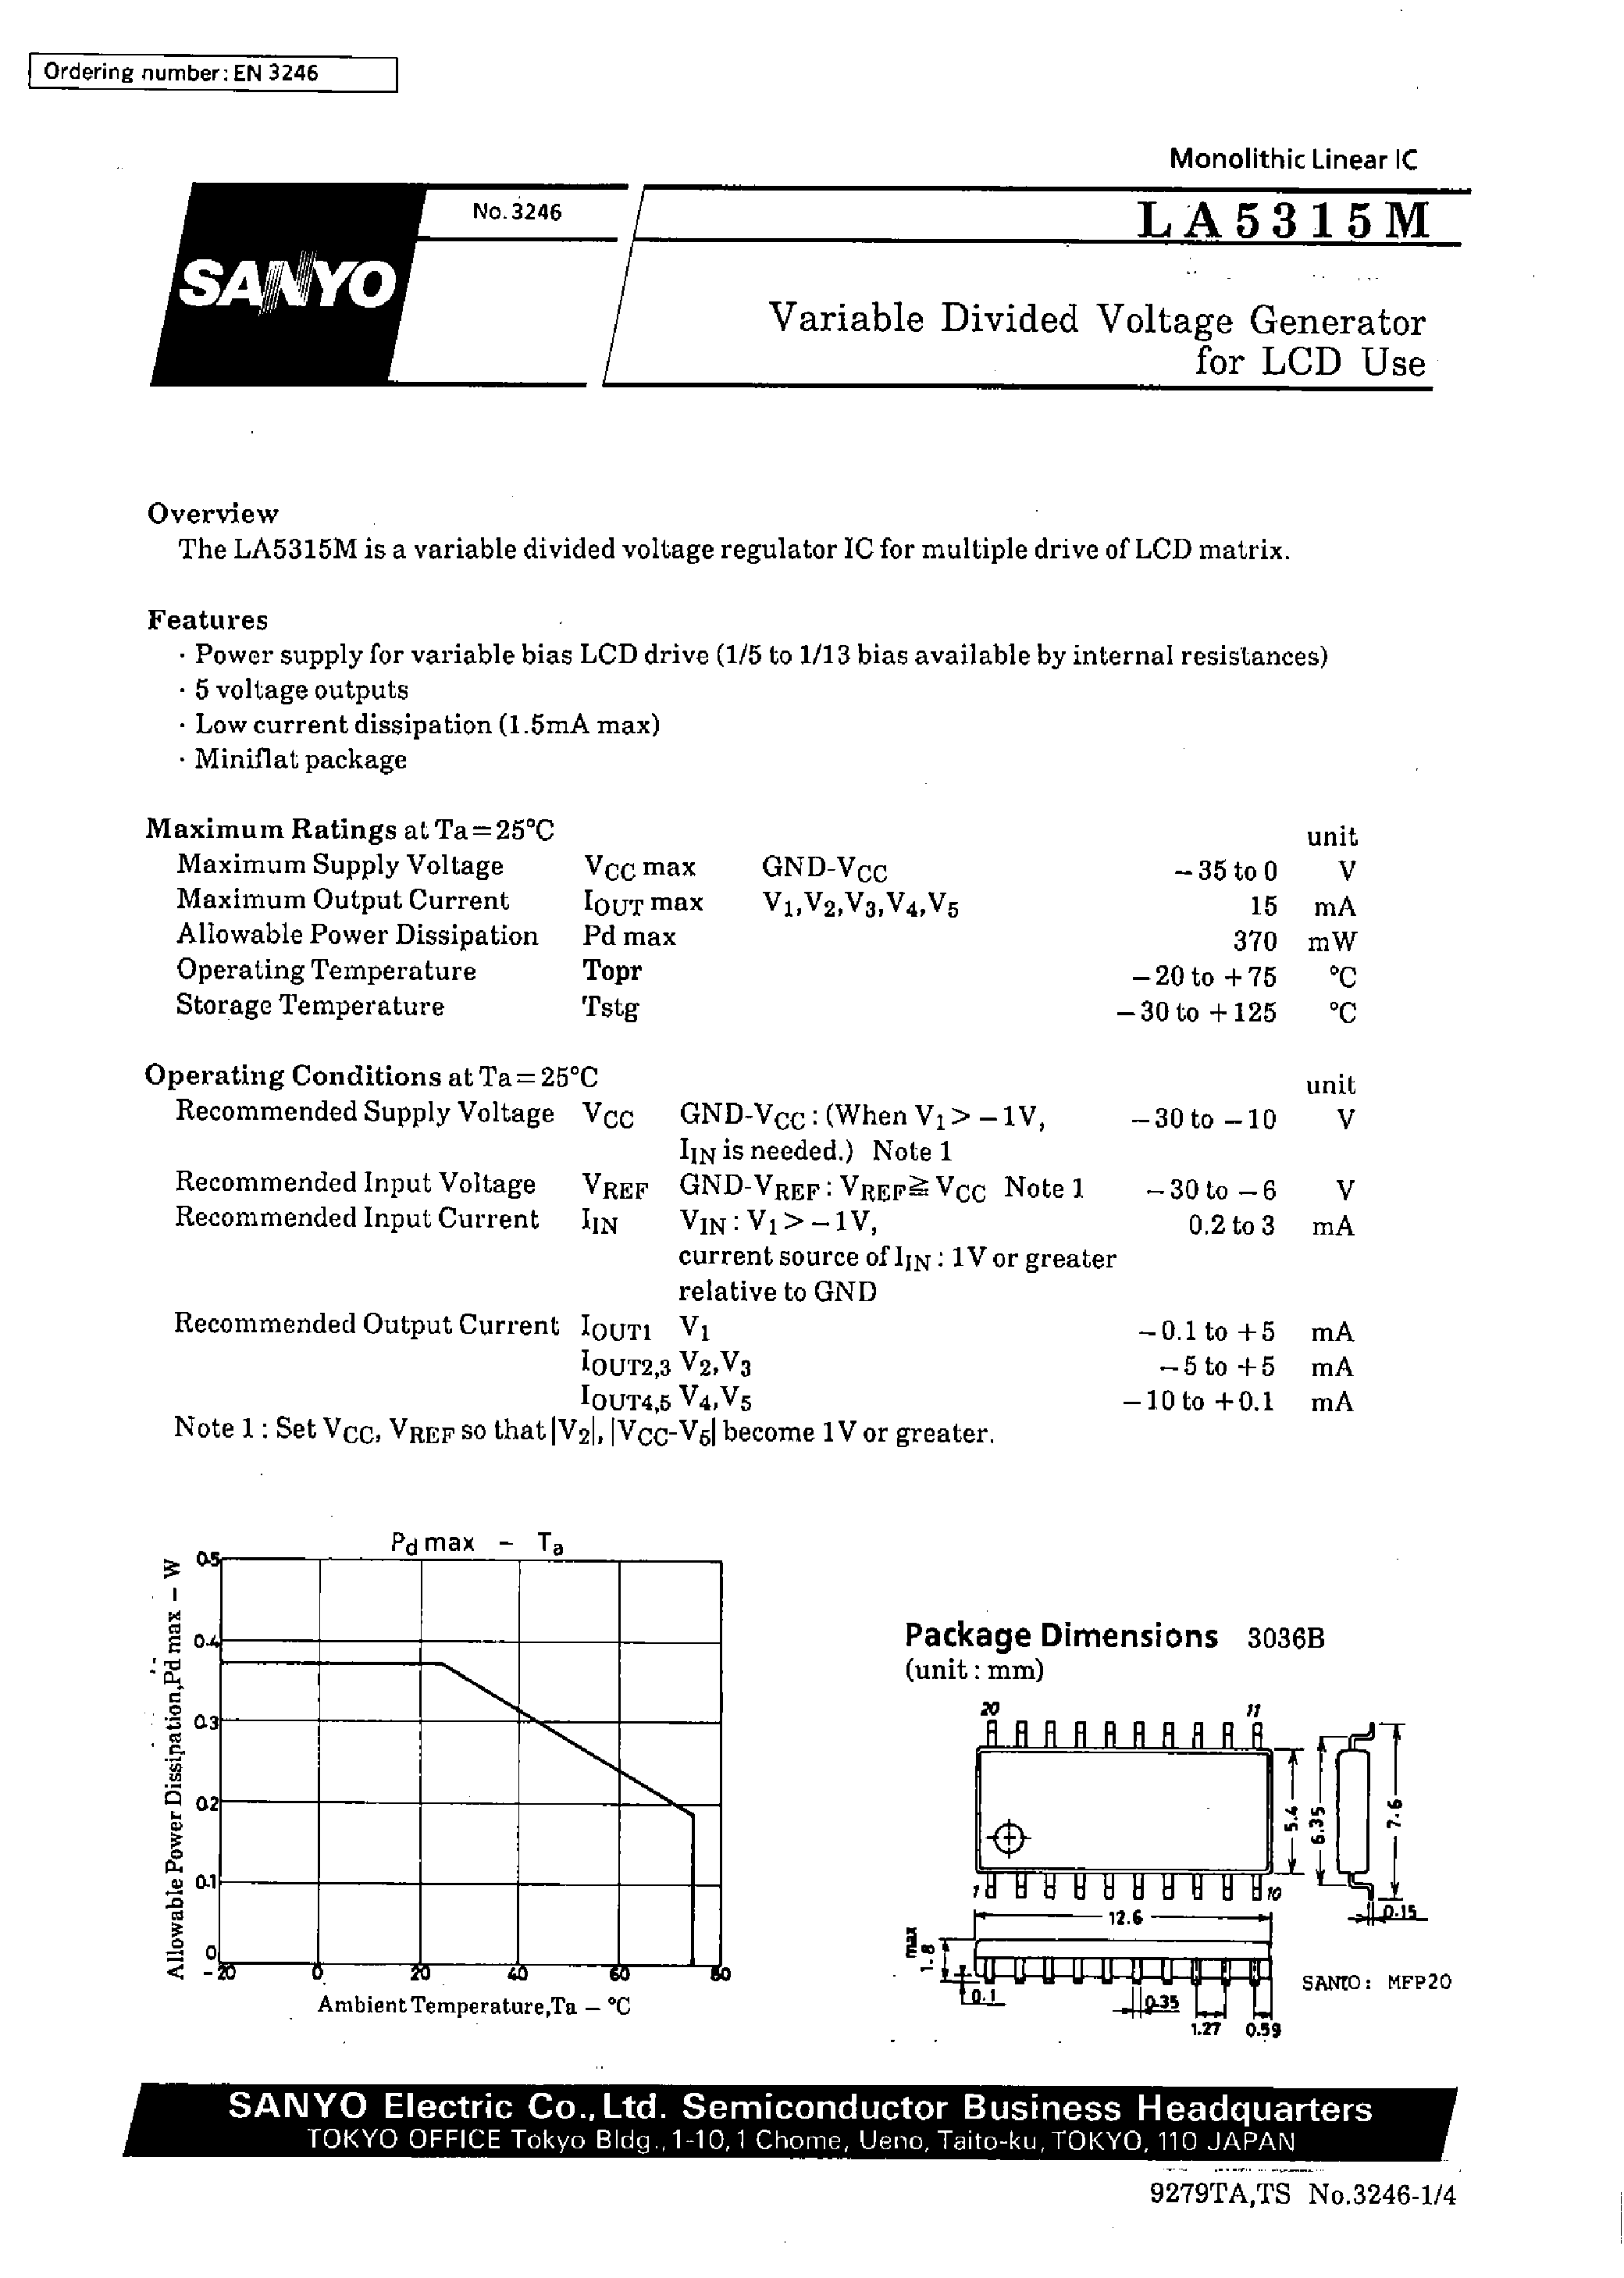 Datasheet LA5315M - Variable Divided Voltage Generator for LCD Use page 1